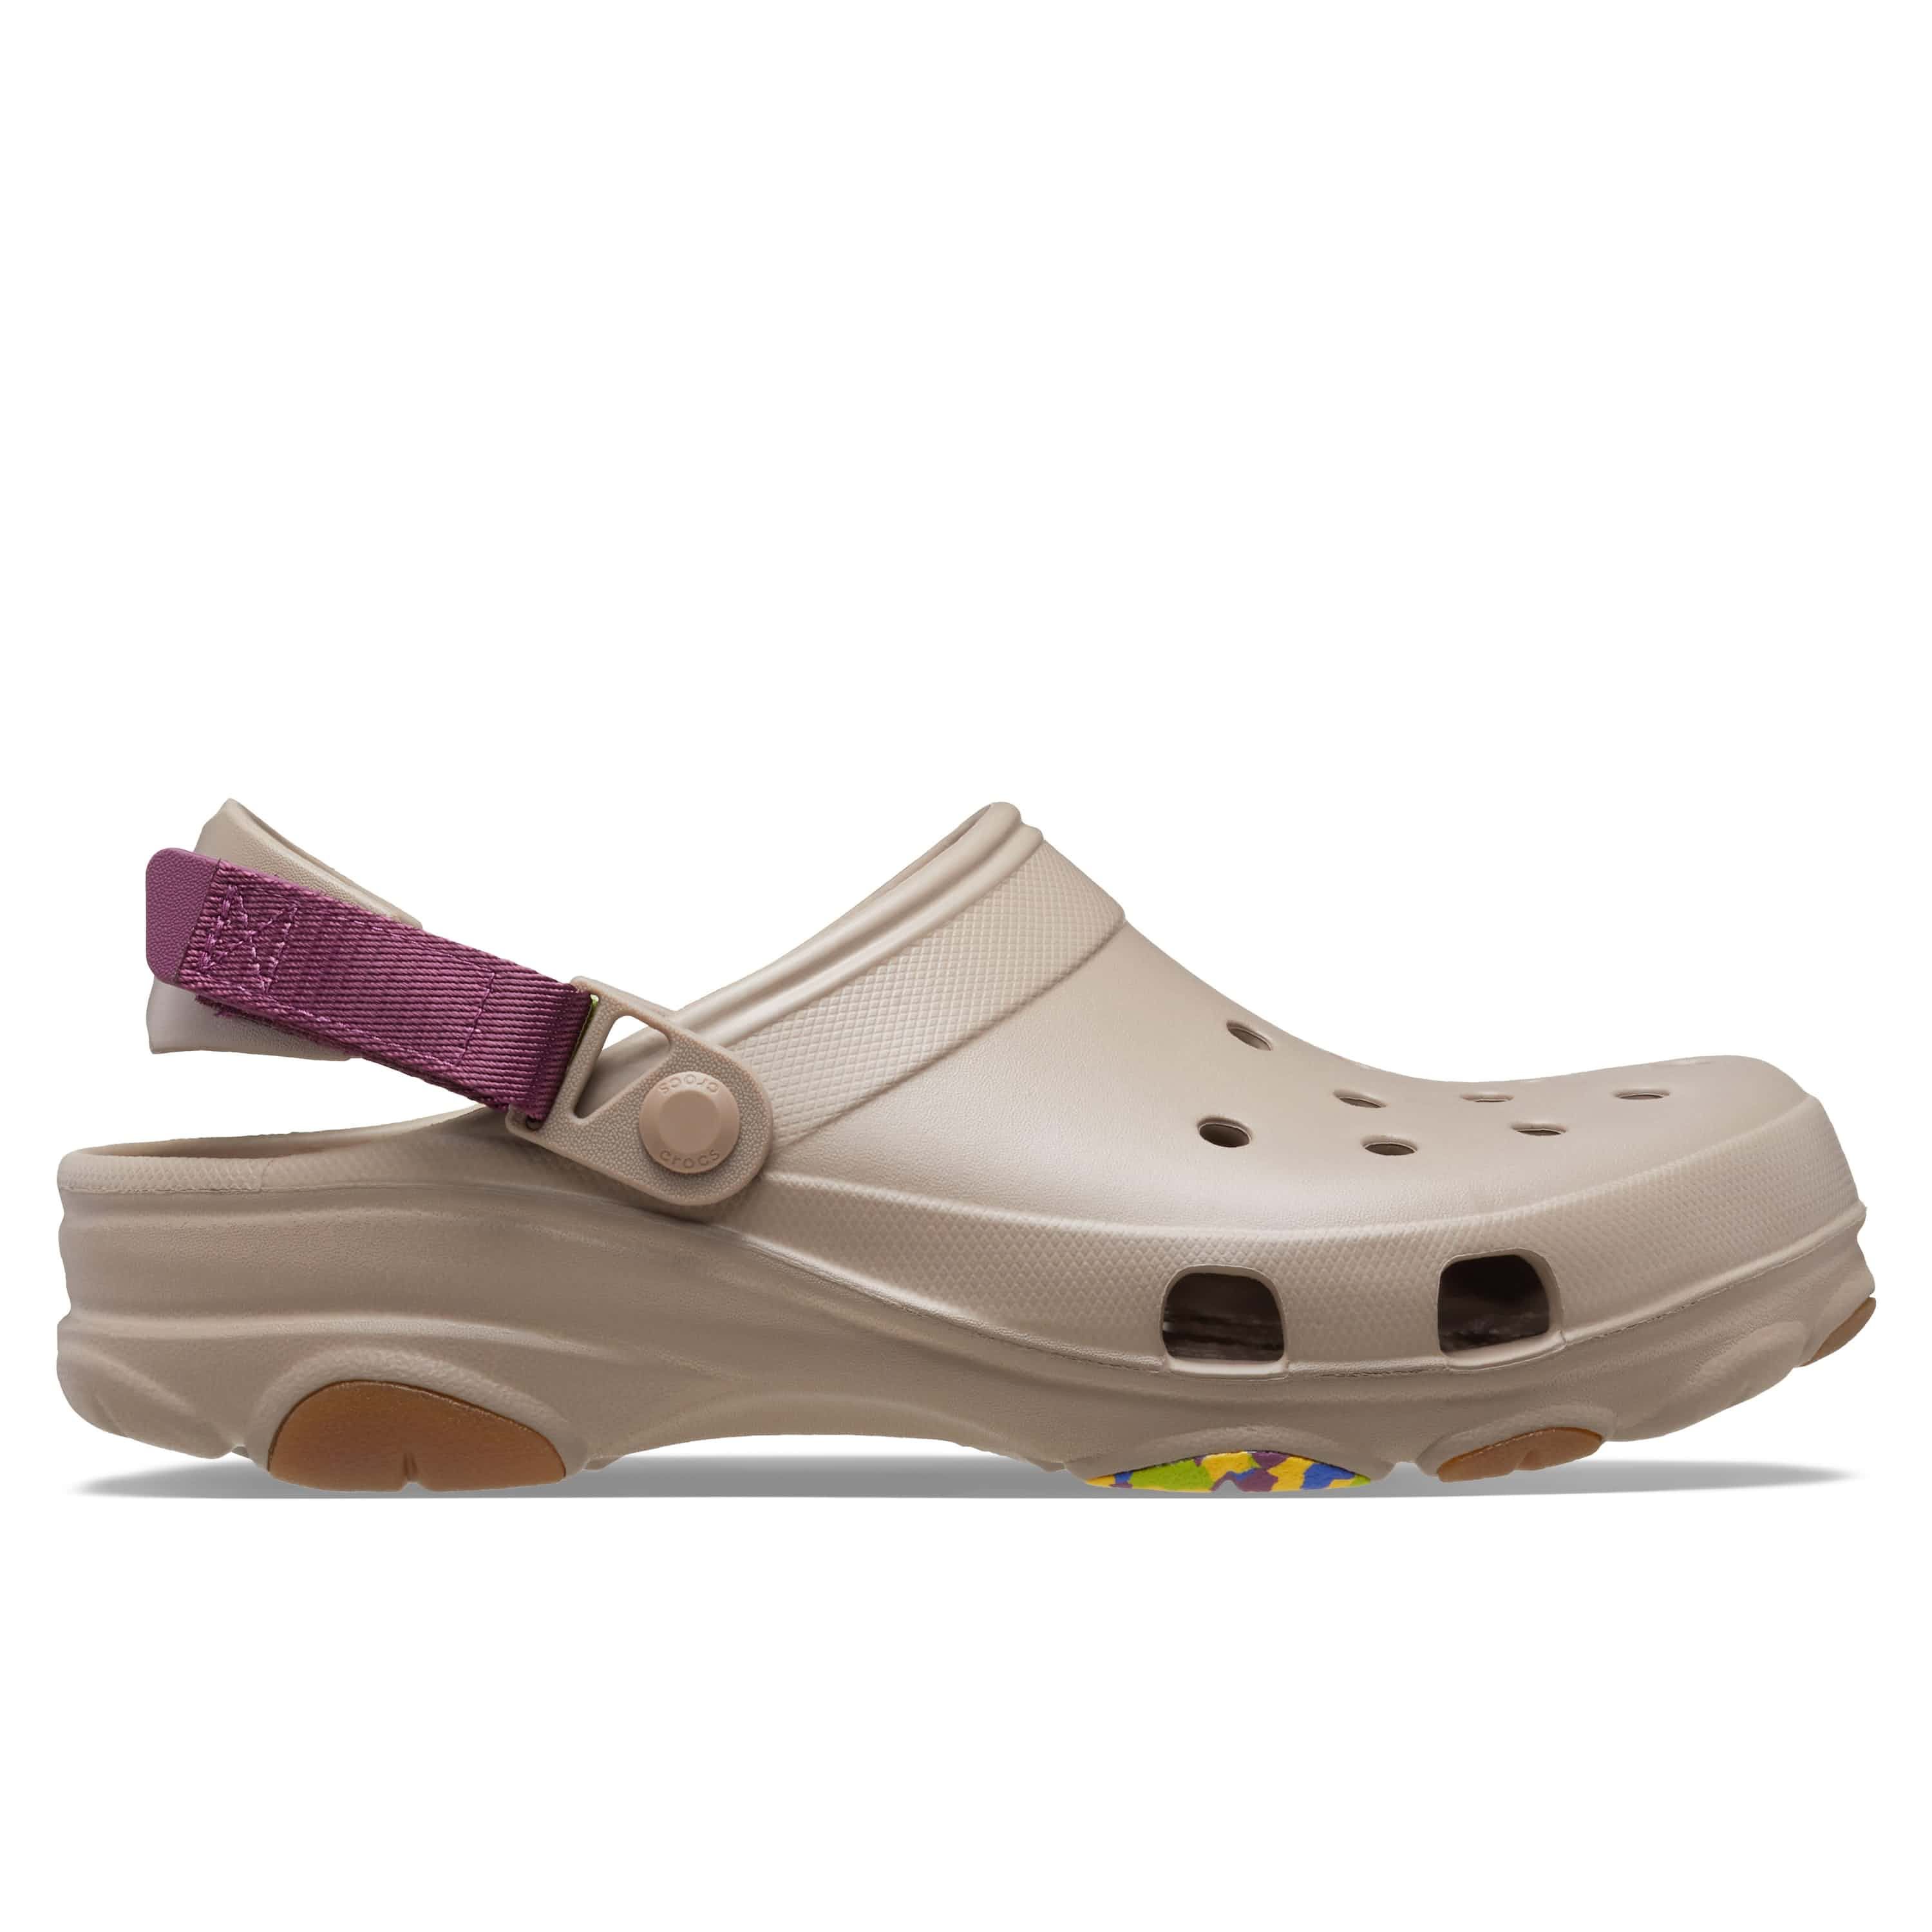 Crocs for women: Top 7 Crocs for Women to Match Every Look - The Economic  Times